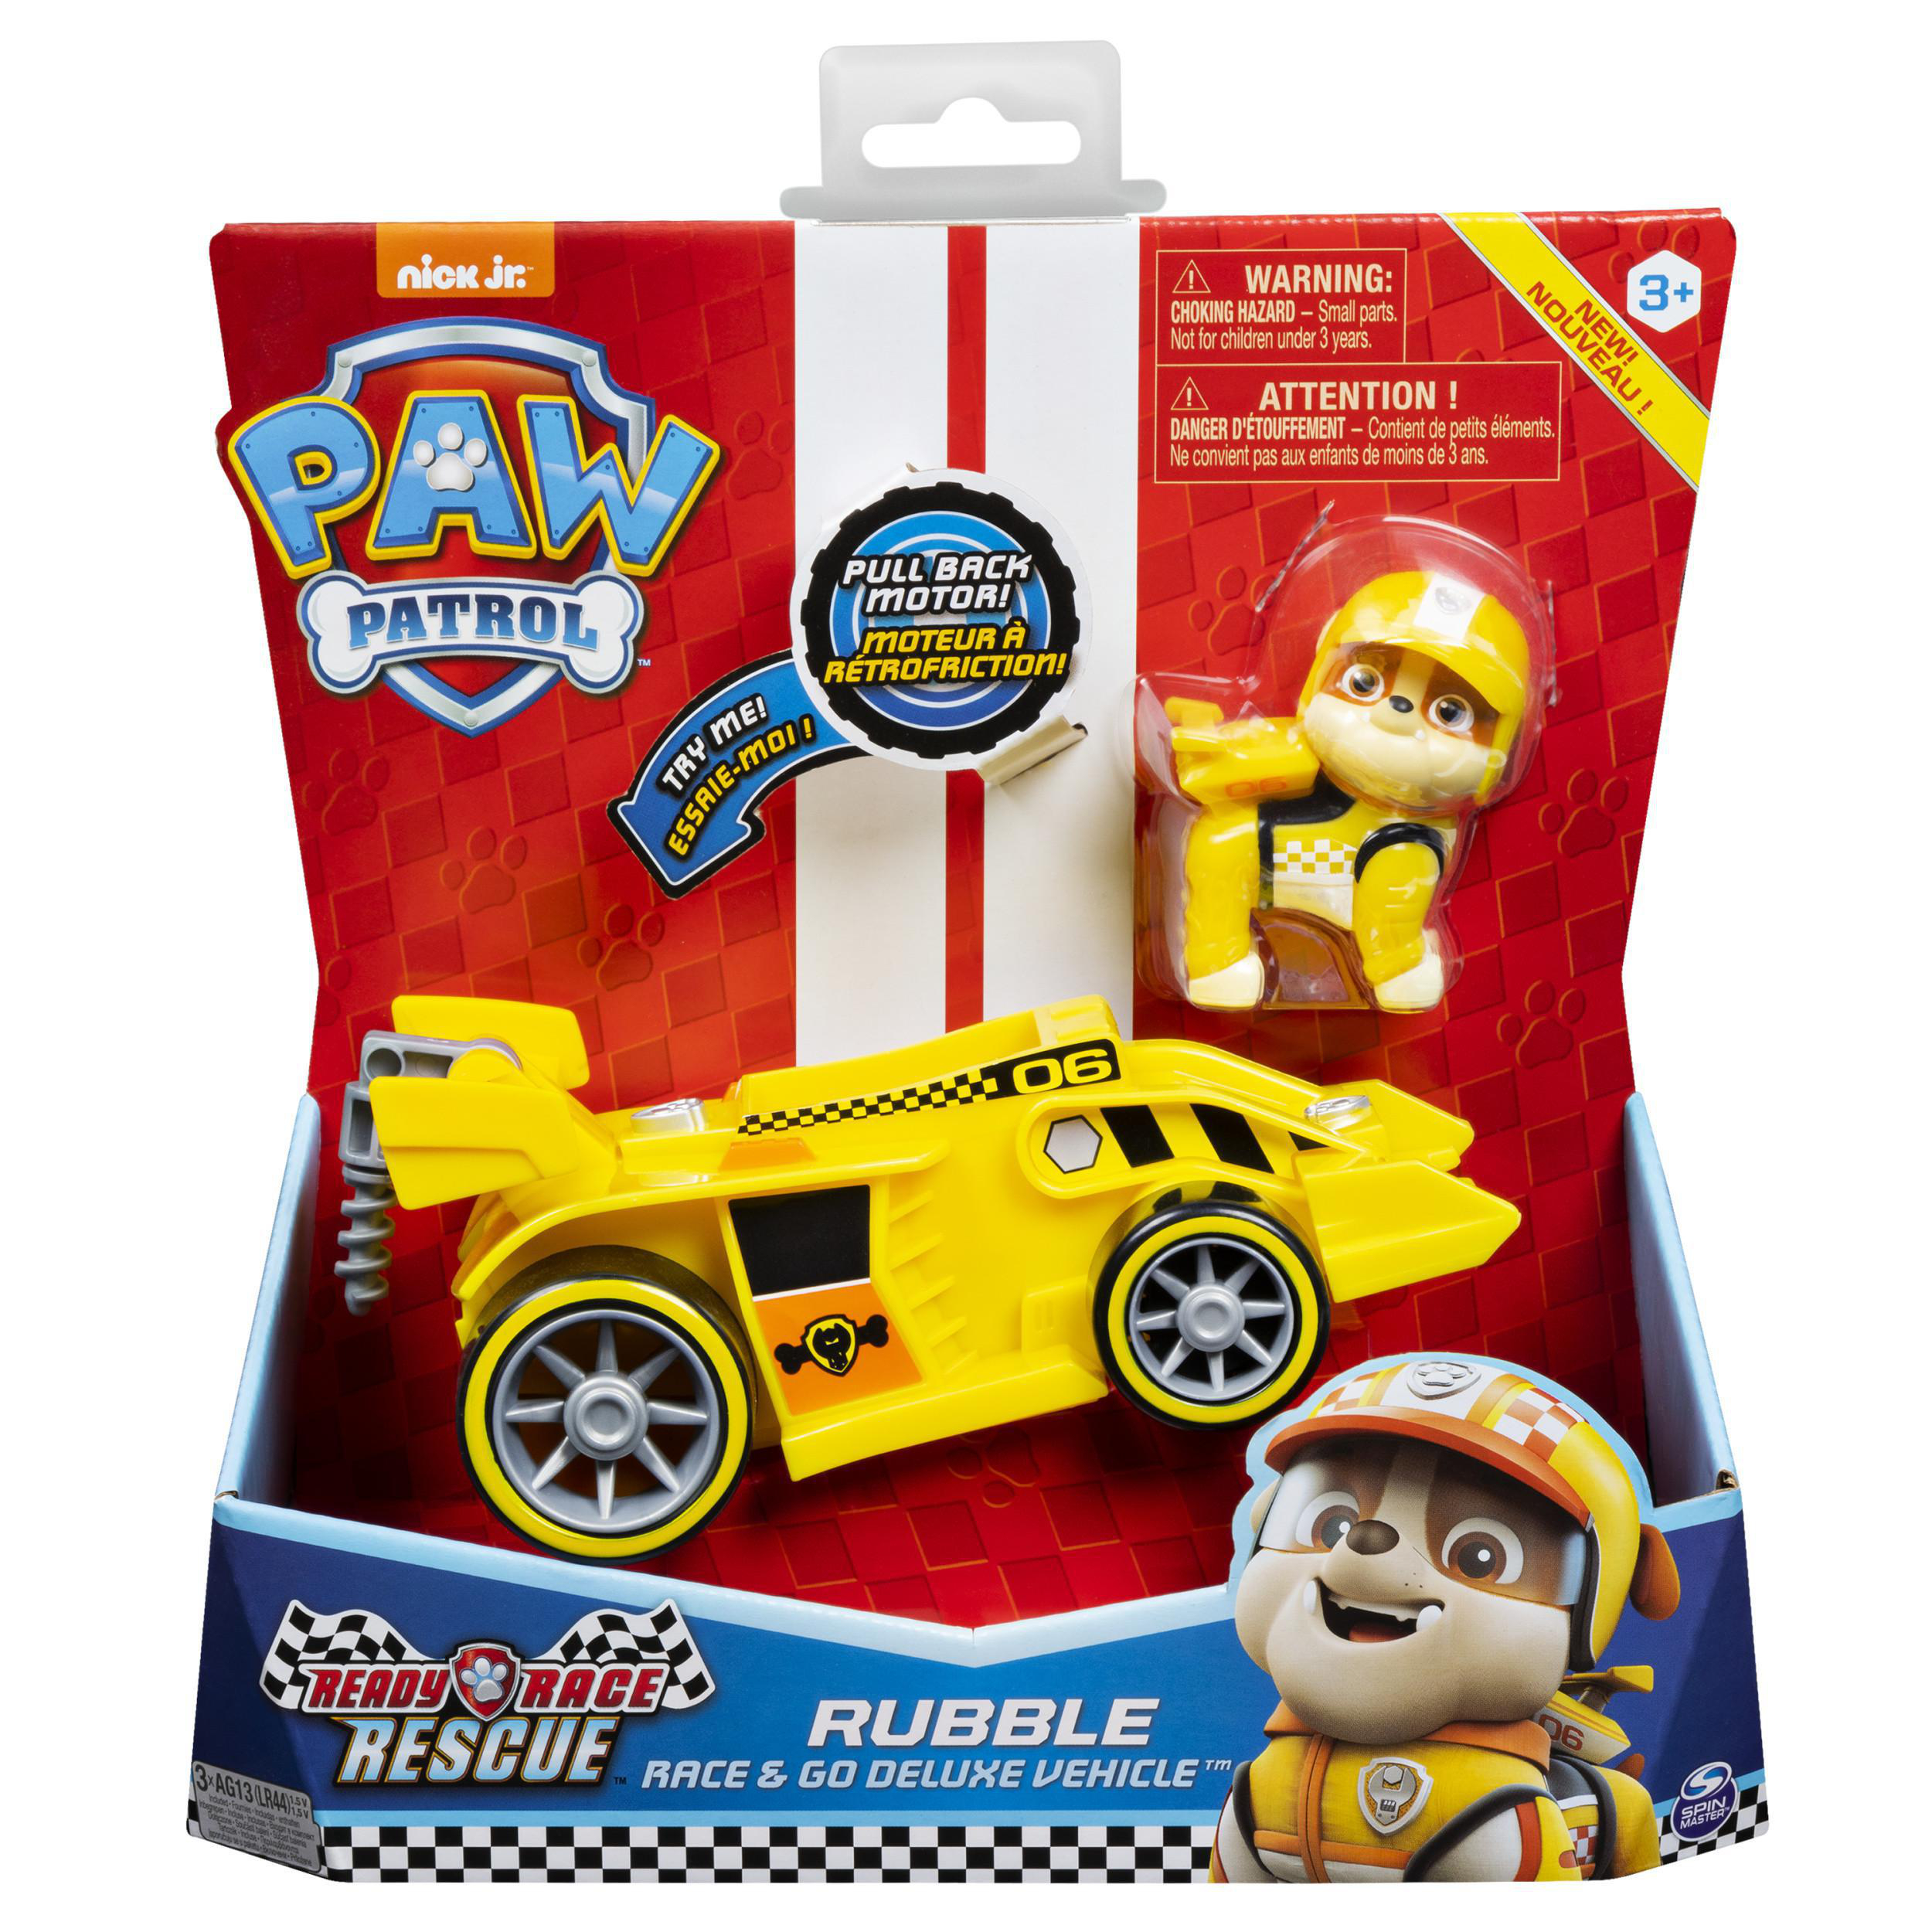 SPIN MASTER Paw Mehrfarbig Patrol Rubble Ready, Spielset Race, Rescue Themed Vehicle